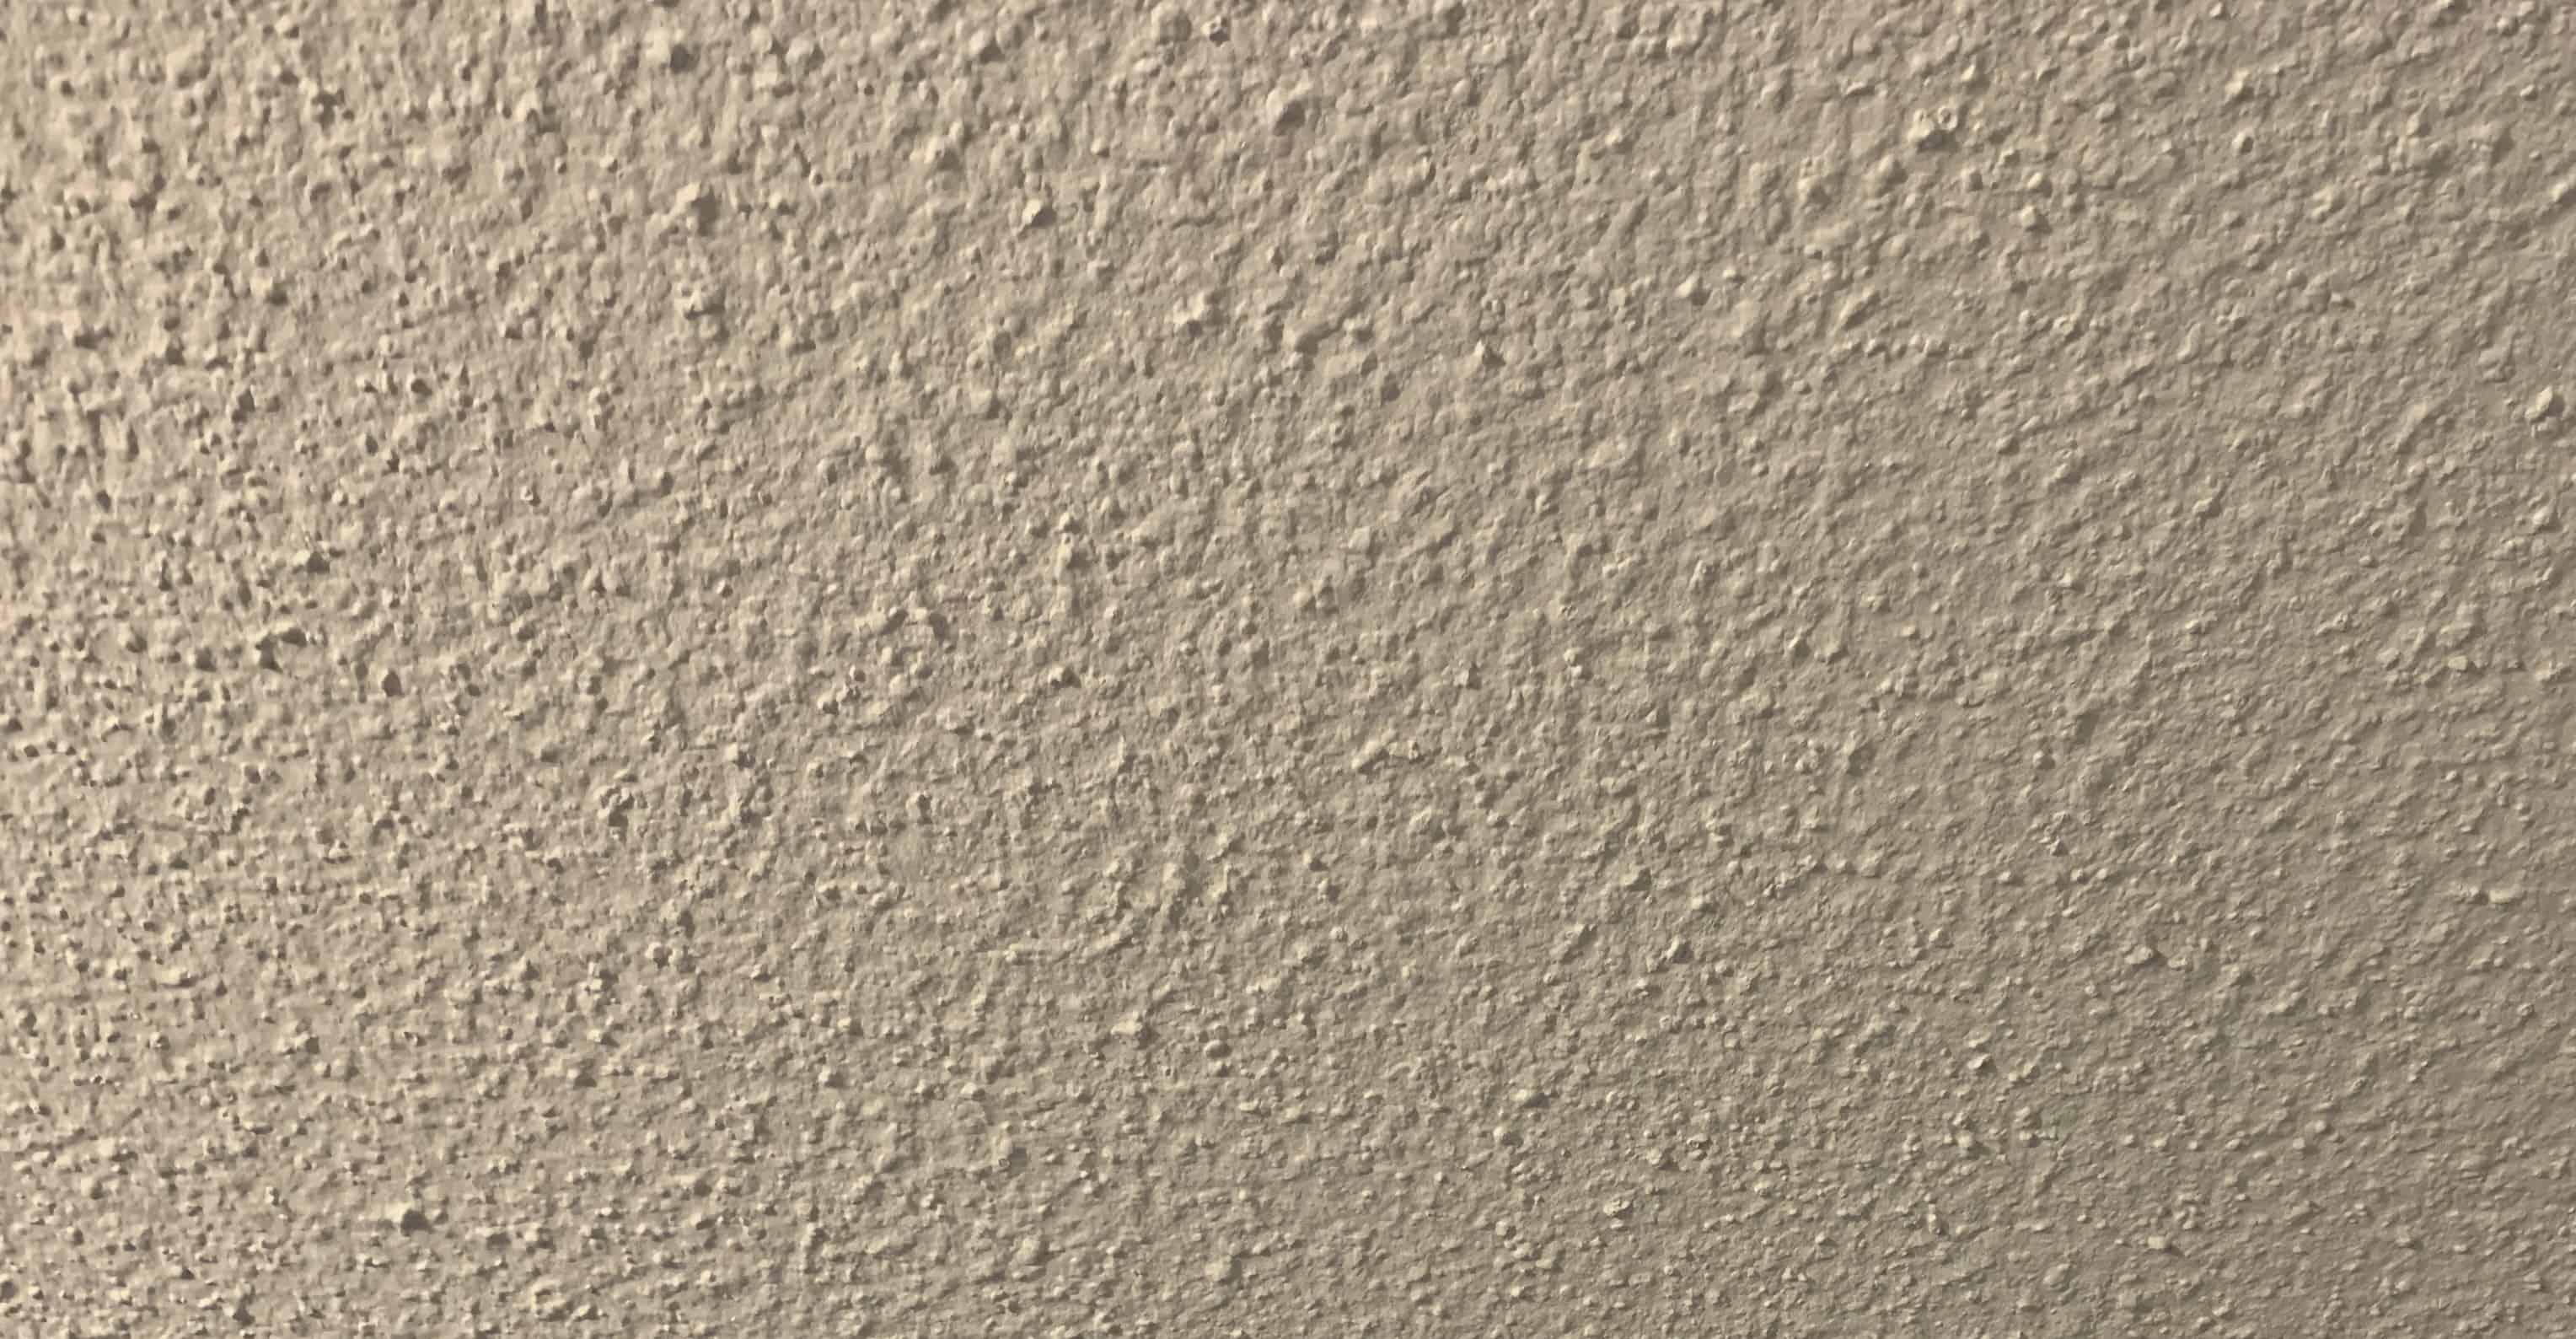 Popcorn Ceiling Removal Guide Remodel Works